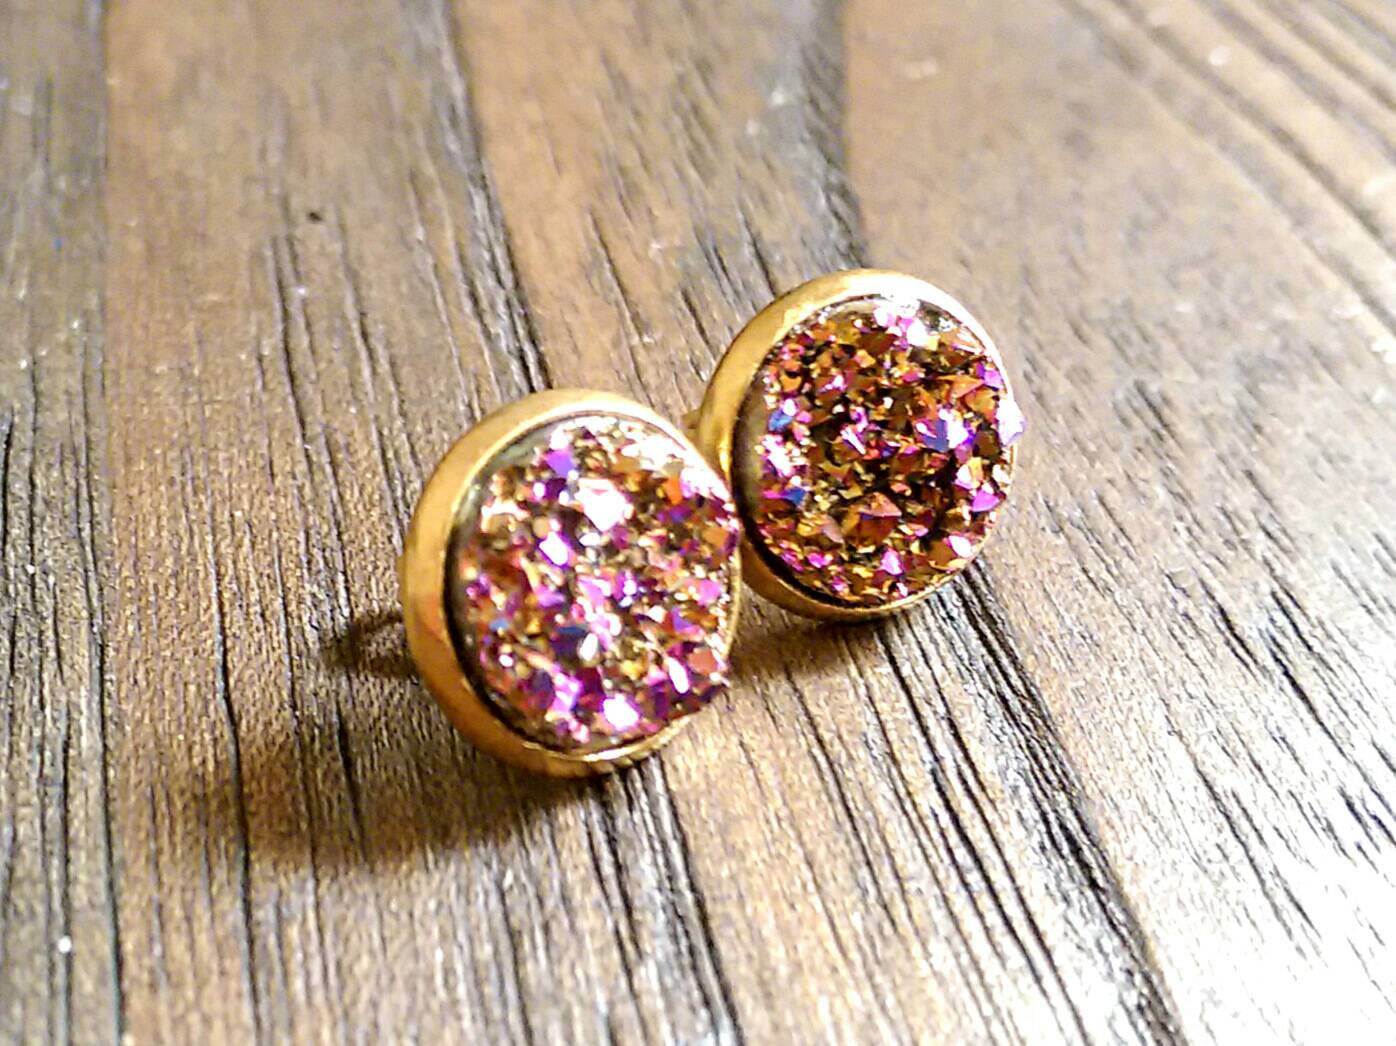 Rose Pink Faux Druzy Stud Earrings, Gold Plated Stainless Steel Earrings 12mm - Silver and Resin Designs